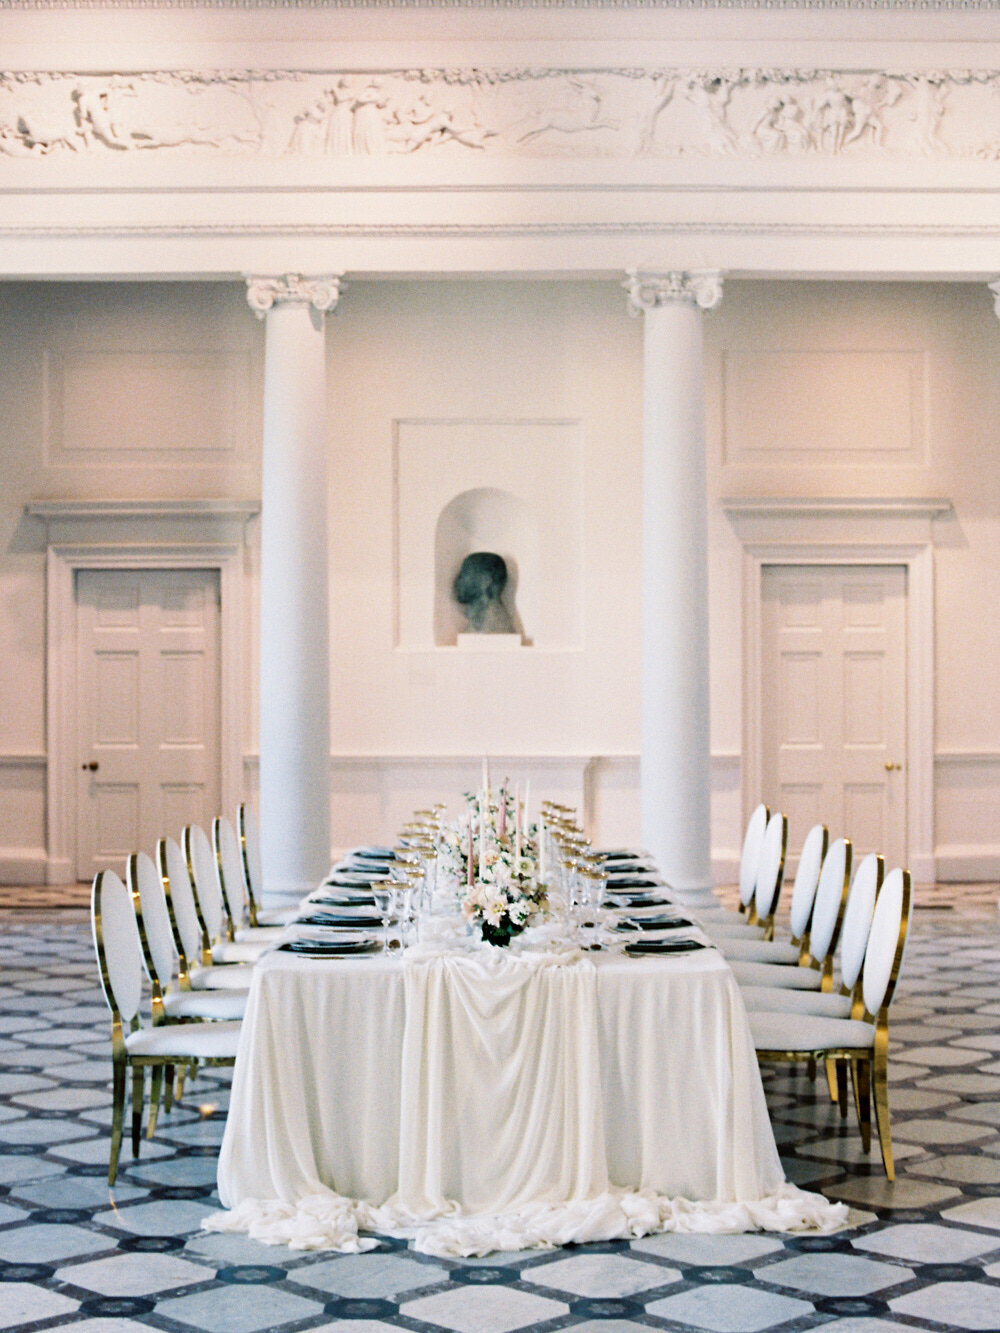 wedding table setting for intimate wedding at compton verney wedding venue